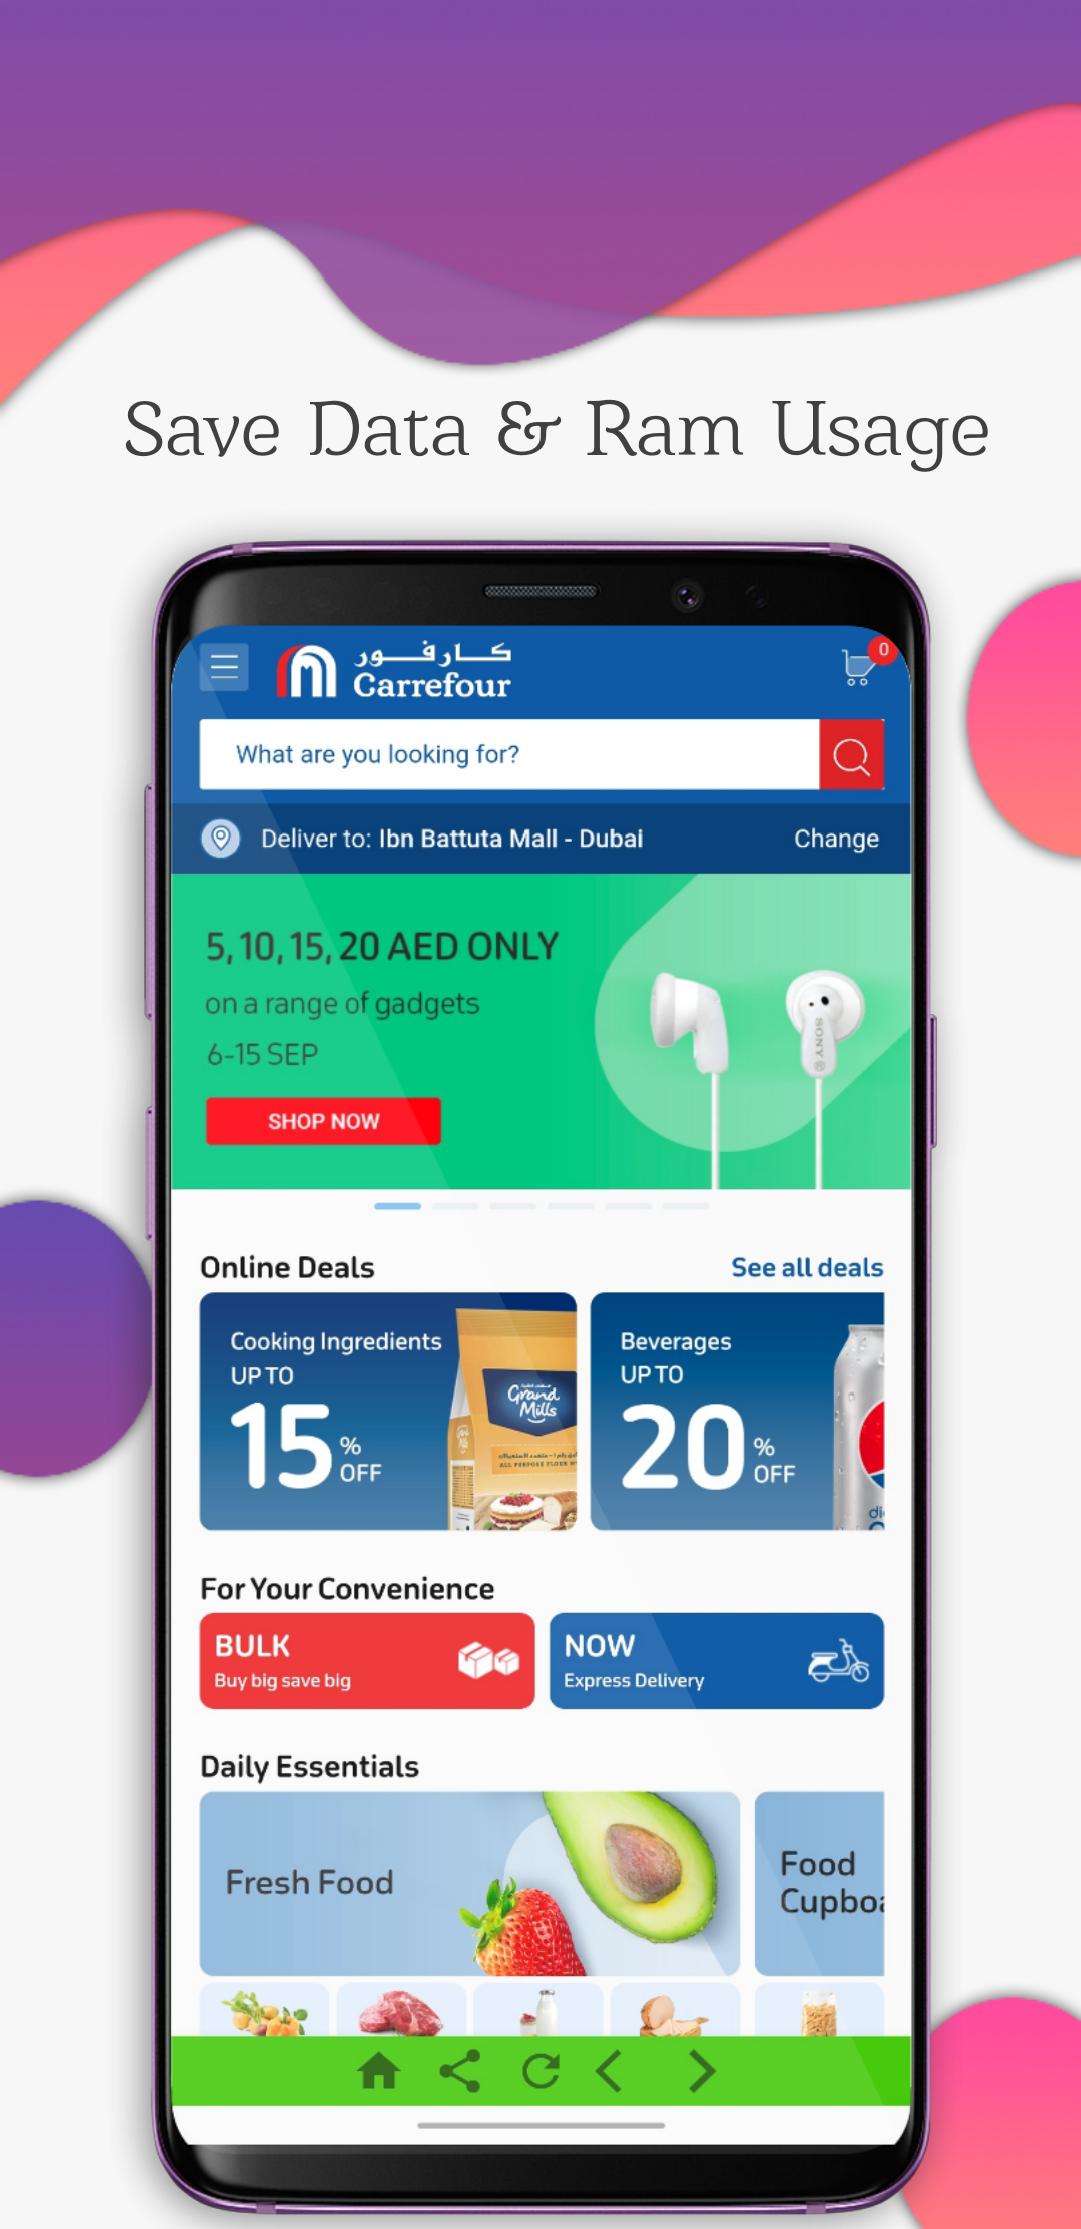 Dubai Uae Online Shopping For Android Apk Download - shop roblox products online in uae free delivery in dubai